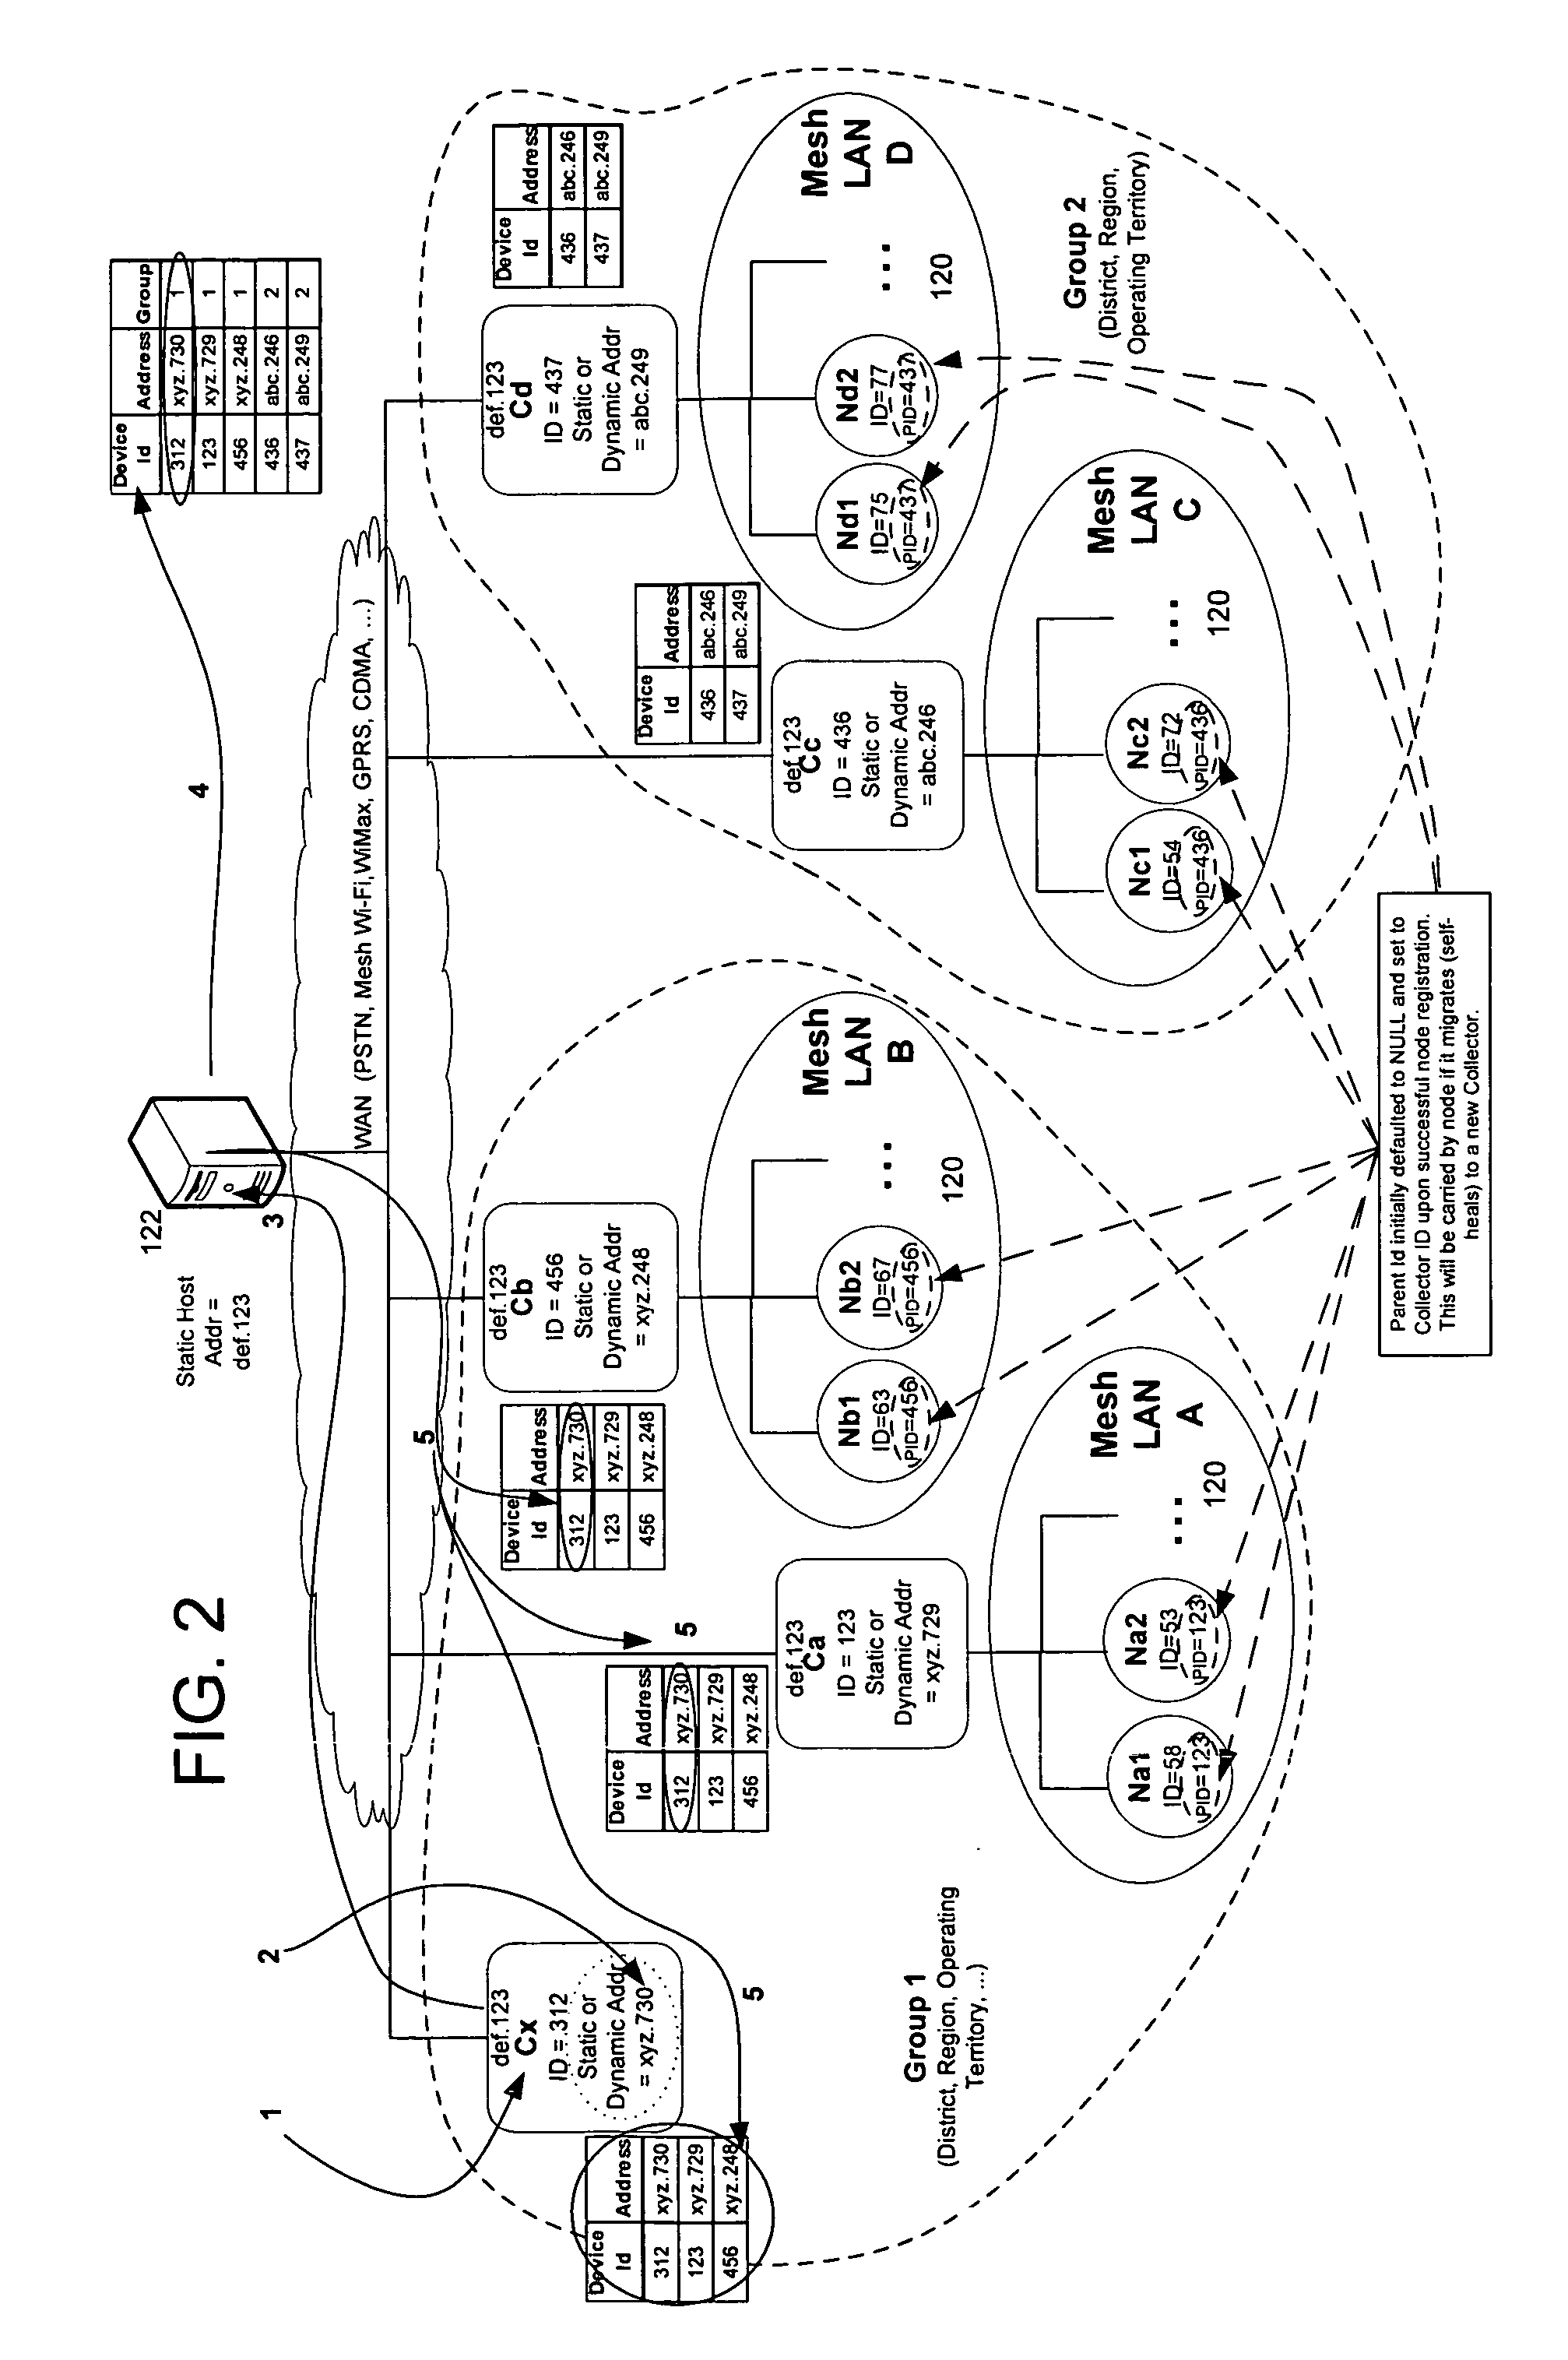 Distributing overall control of mesh AMR LAN networks to WAN interconnected collectors